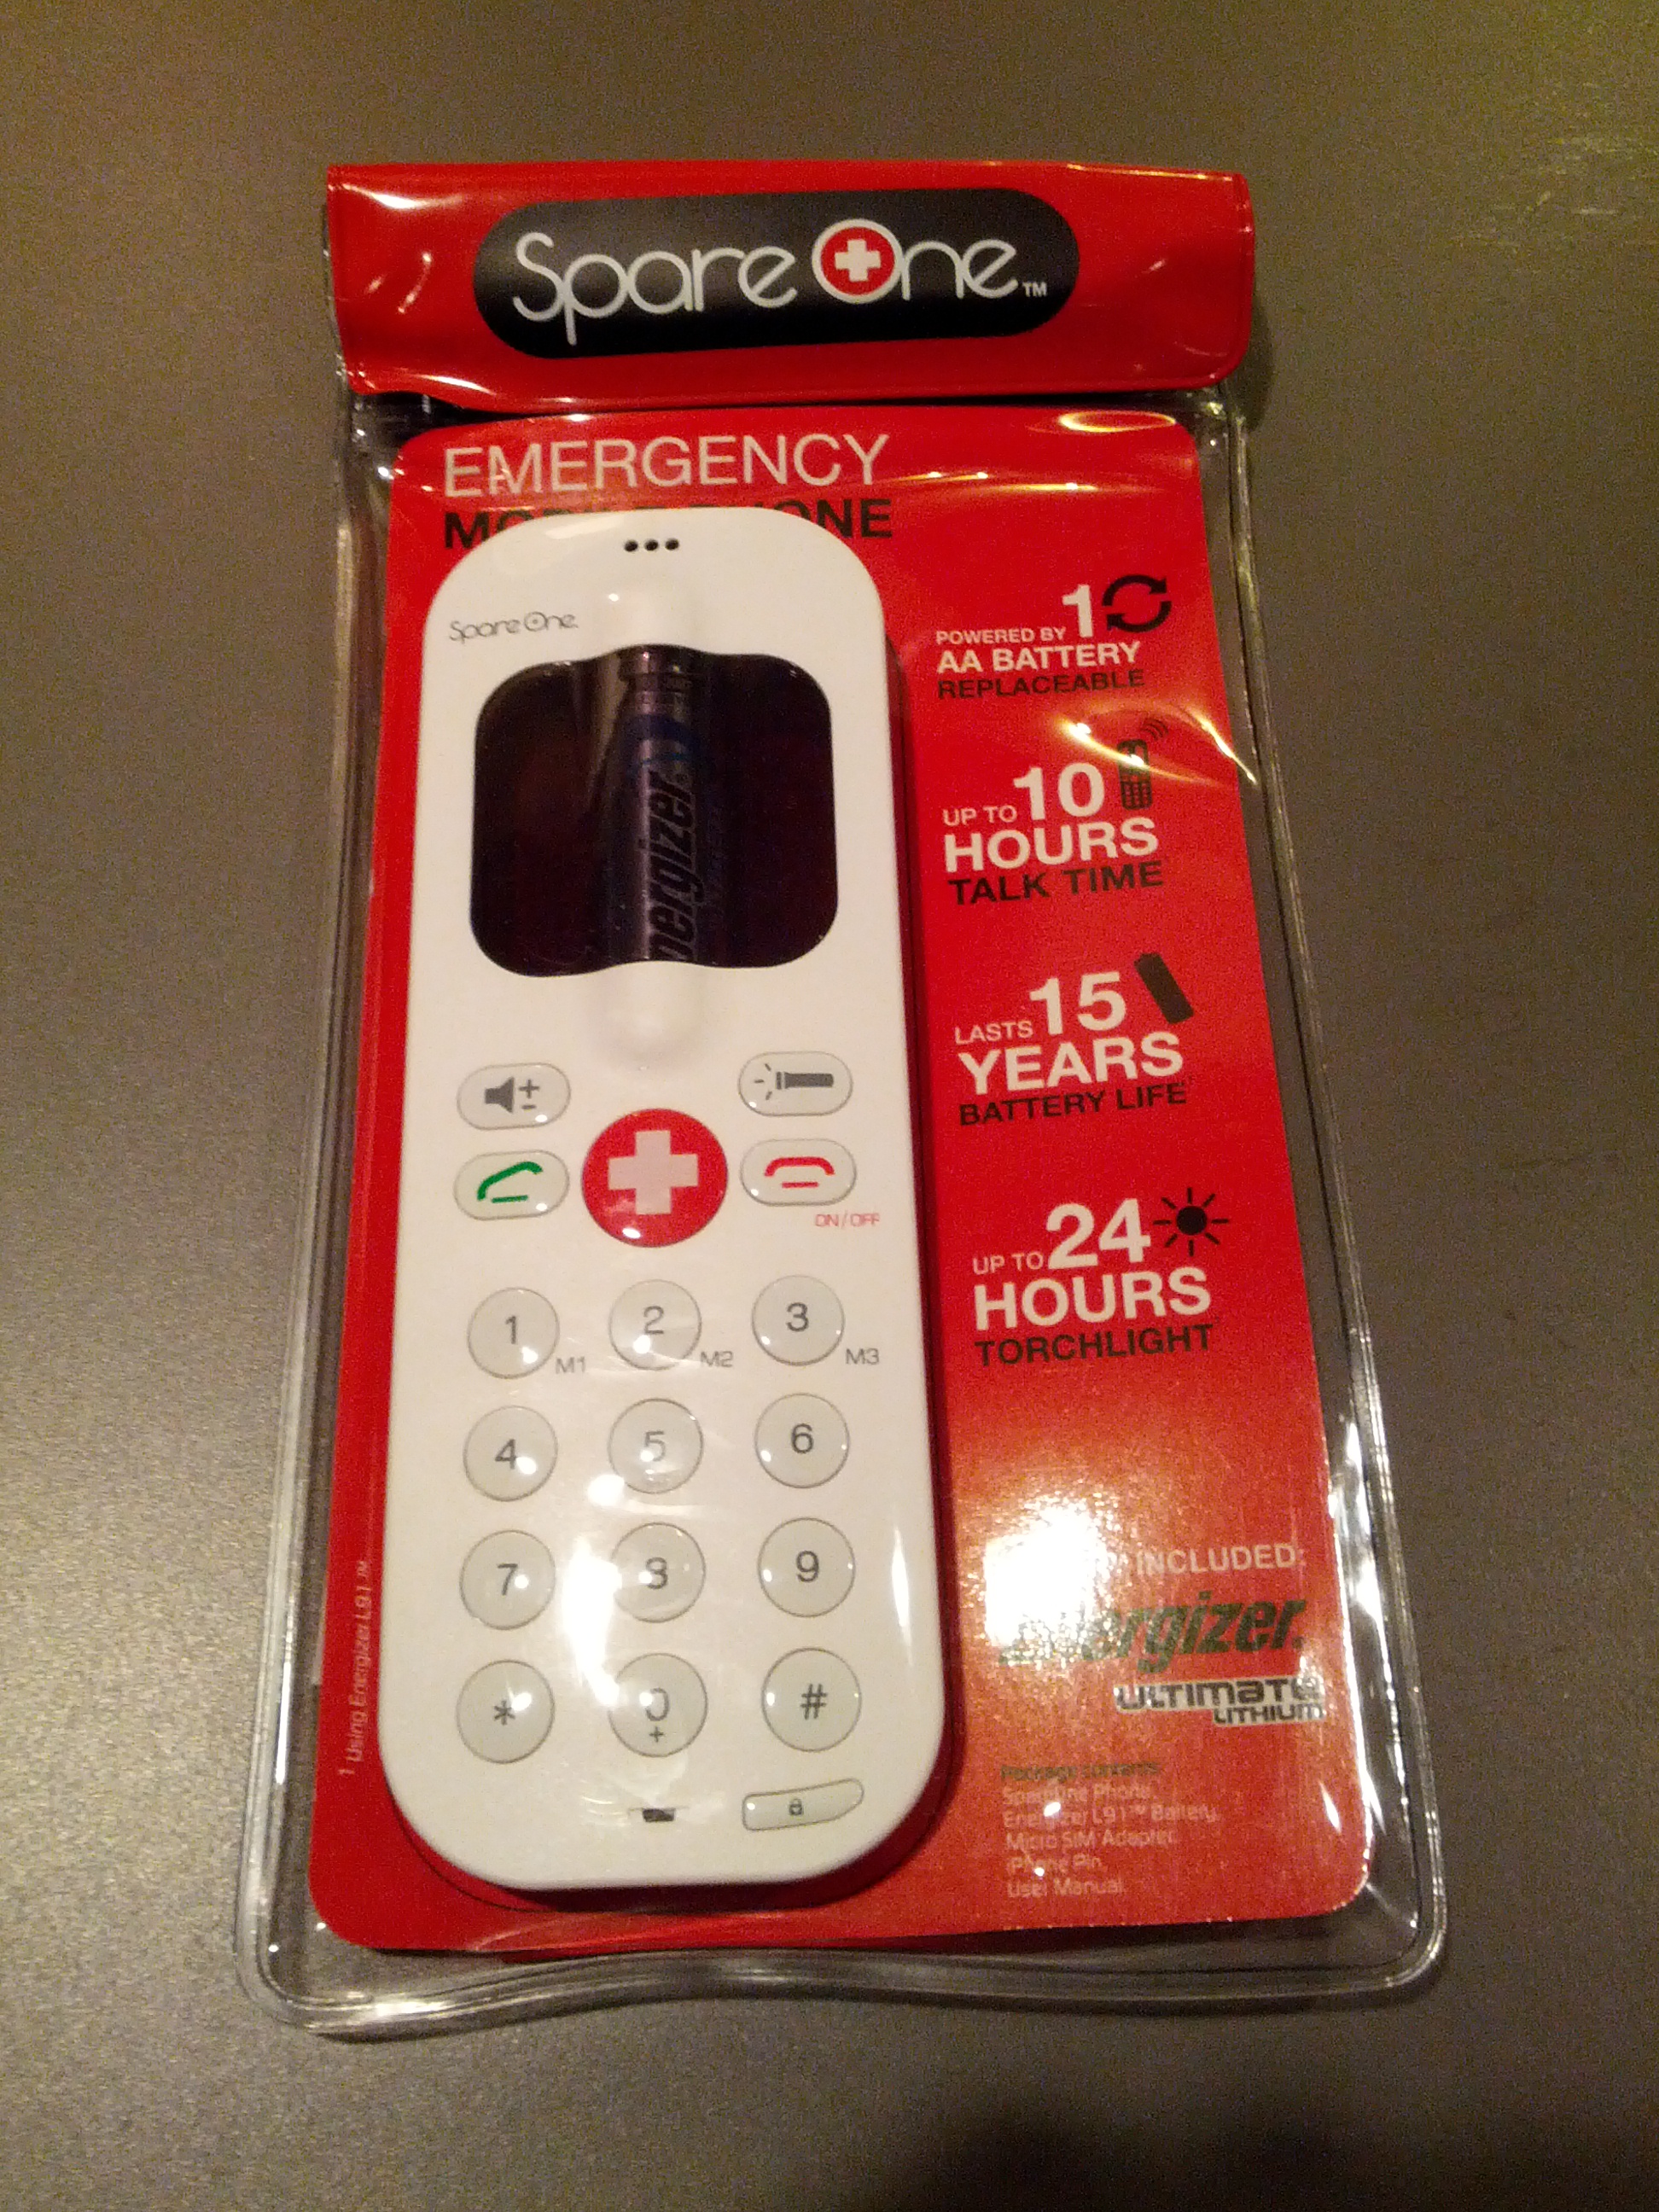 The SpareOne Emergency Cell Phone